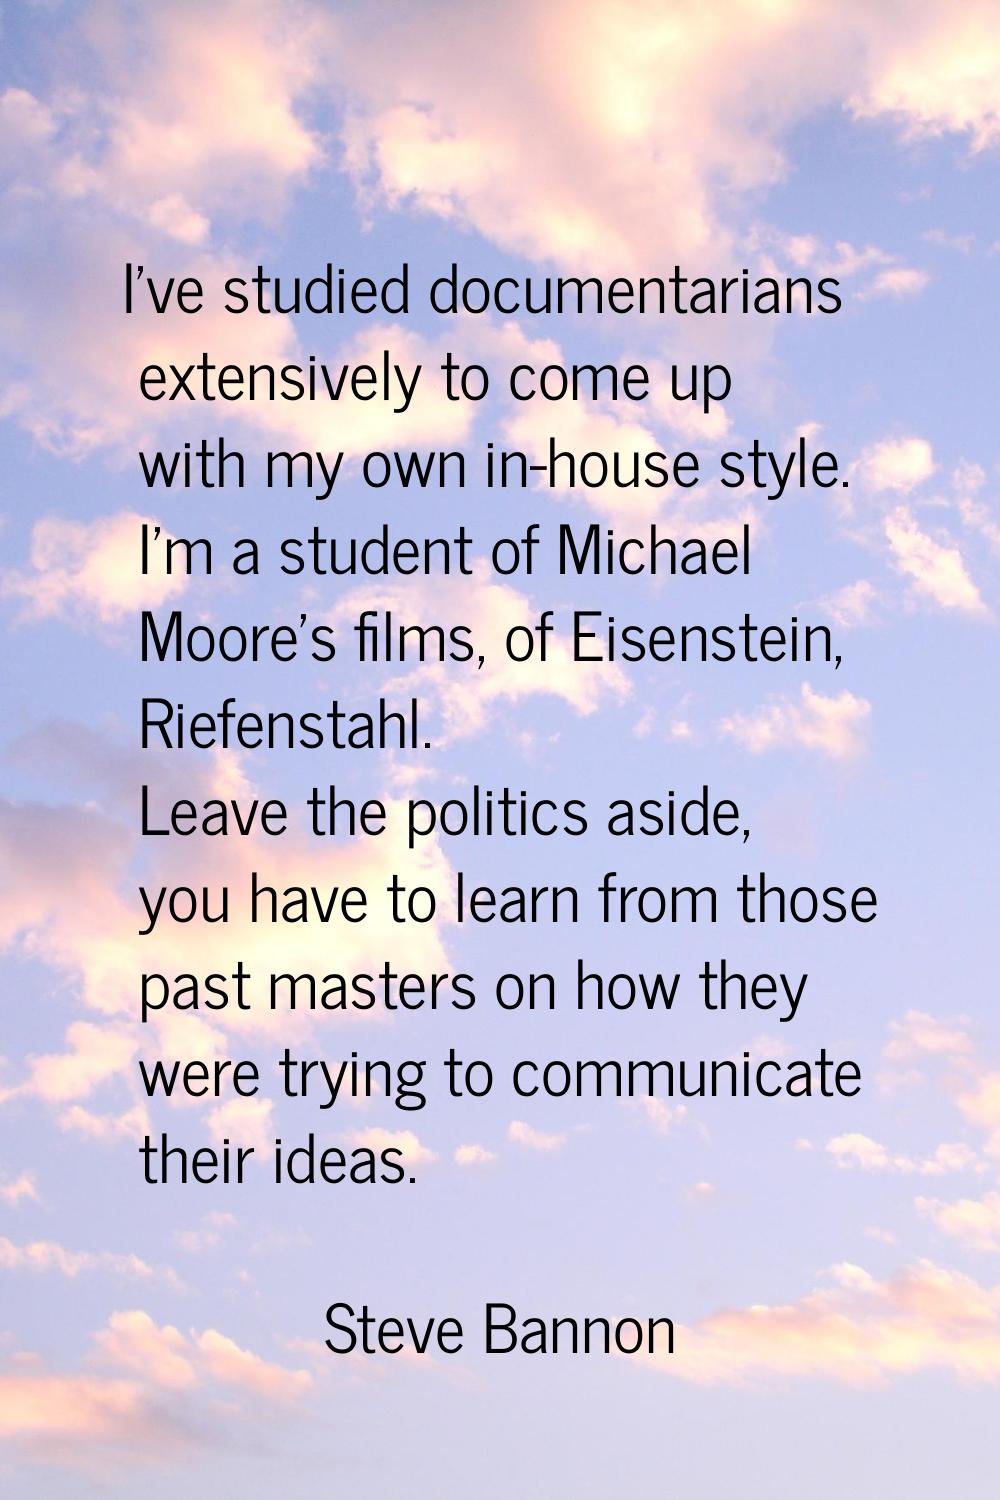 I've studied documentarians extensively to come up with my own in-house style. I'm a student of Mic